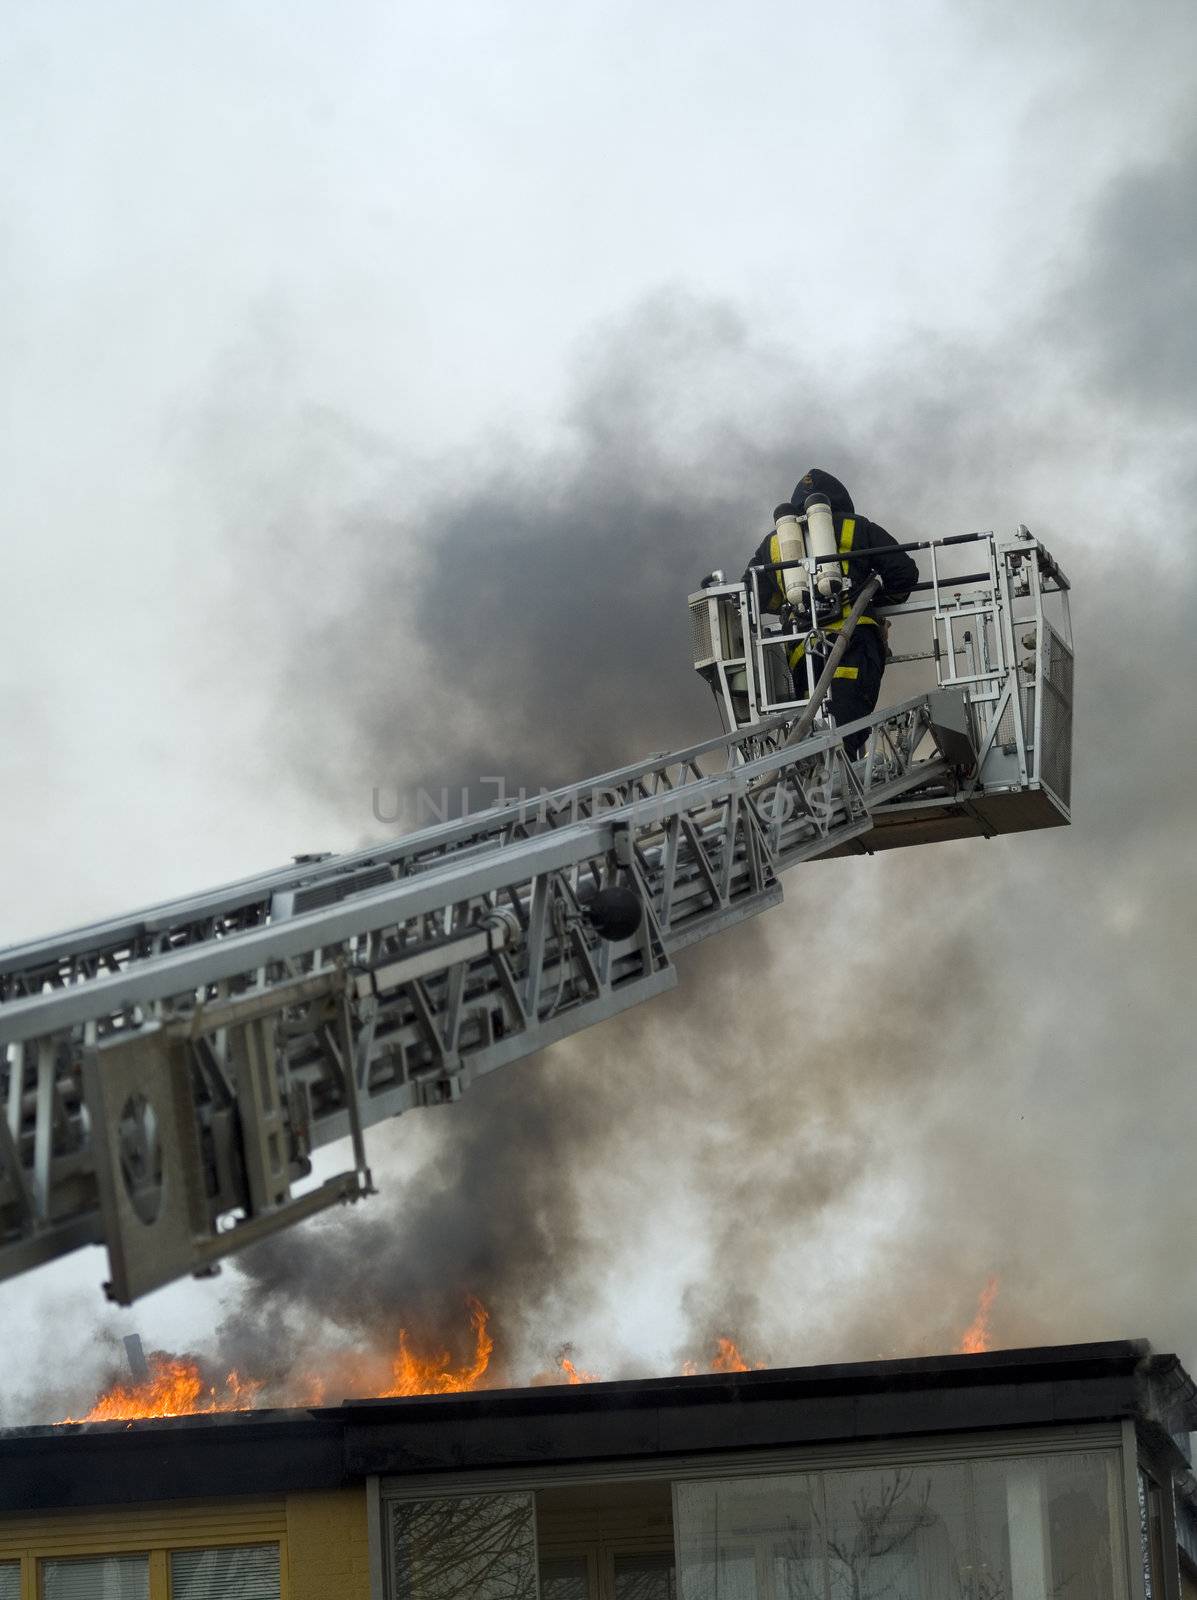 Fireman working on top of a ladder